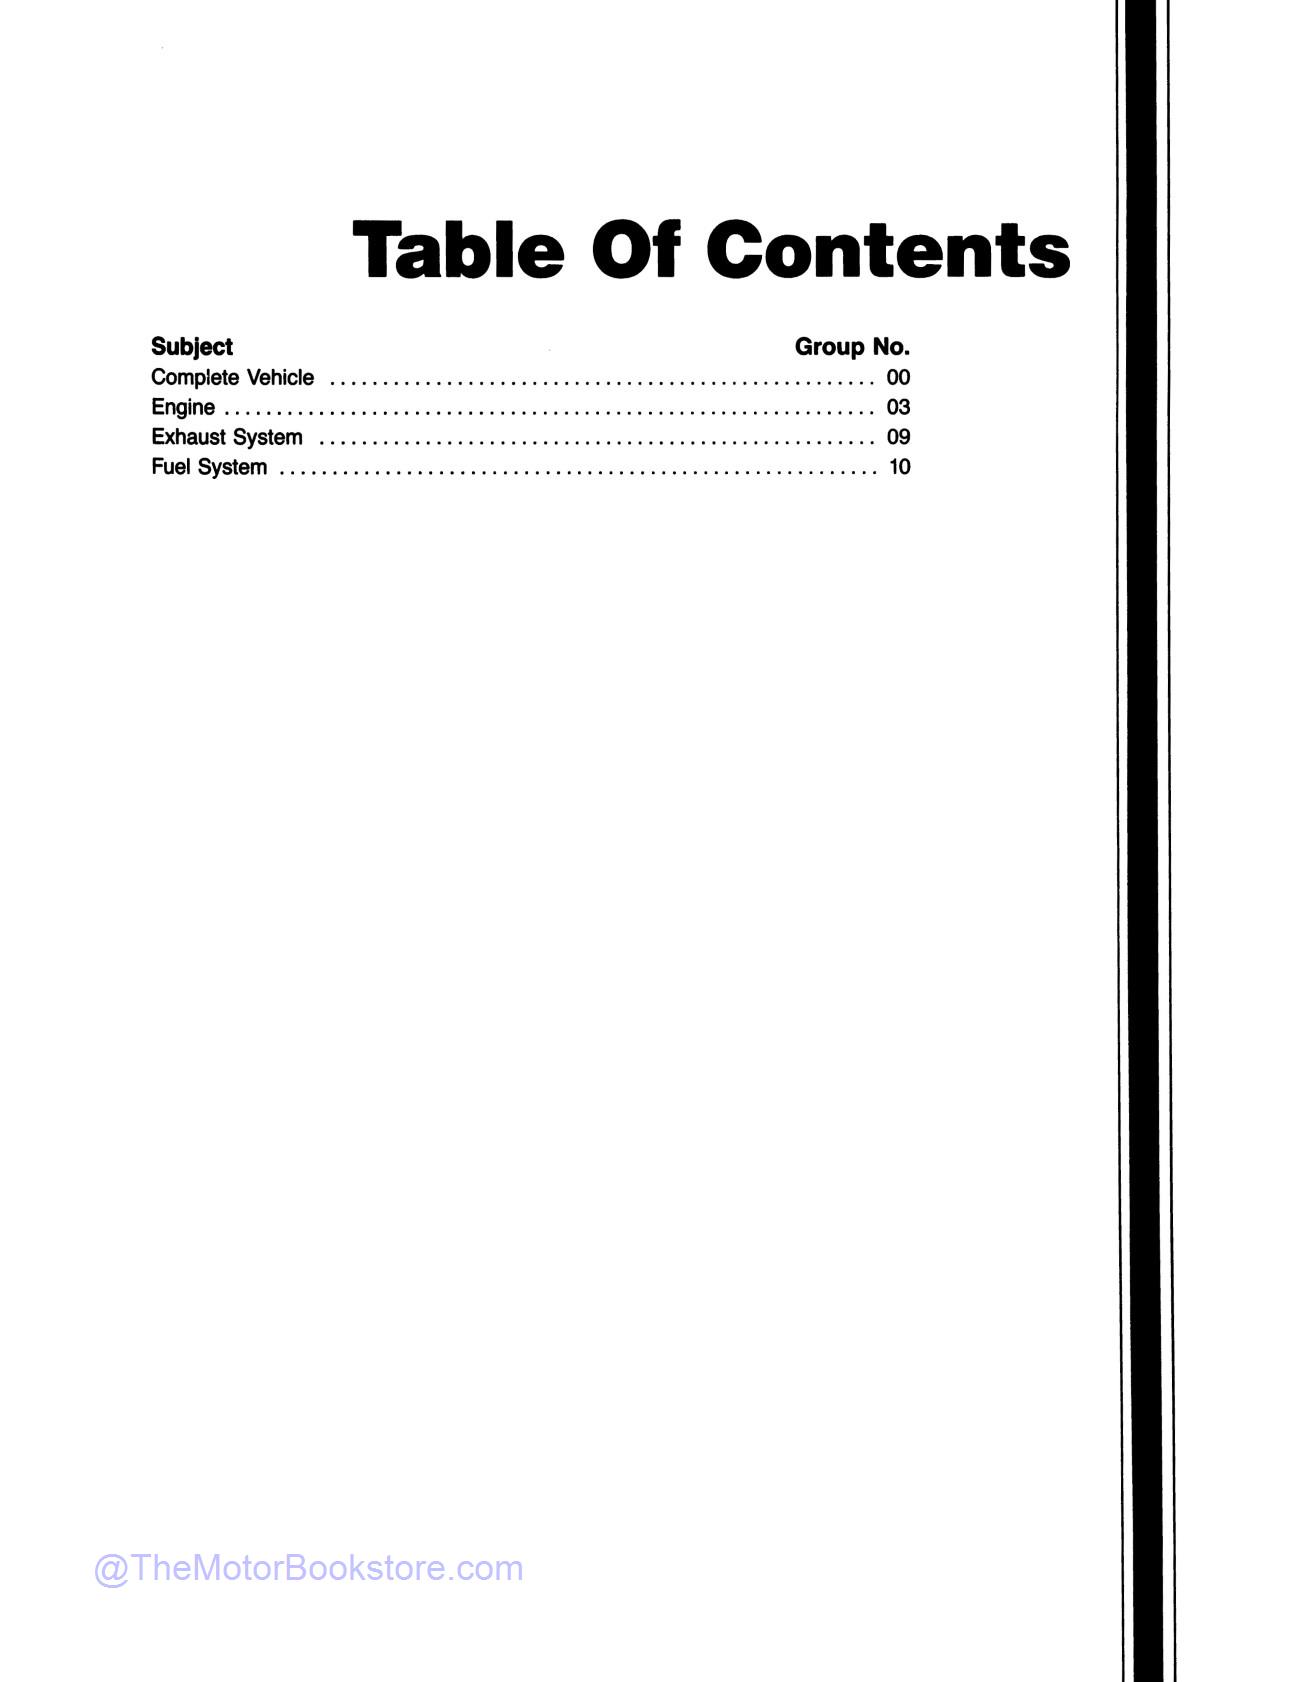 1991 Ford Truck, Bronco, Econoline Shop Manual - F-Series  - Table of Contents 2